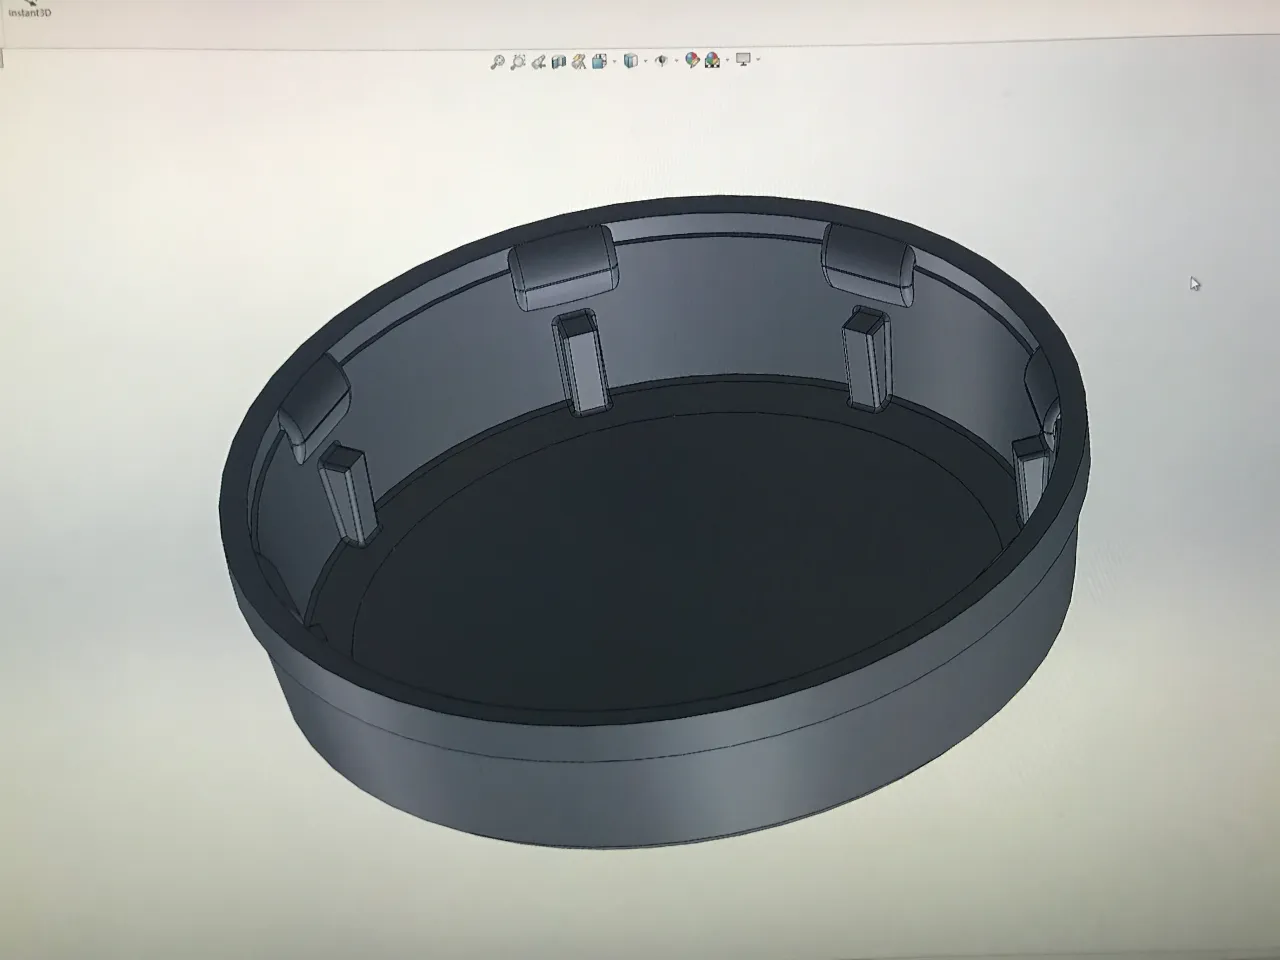 Wheel hub cover for MSW rim with Tesla logo by cellinet